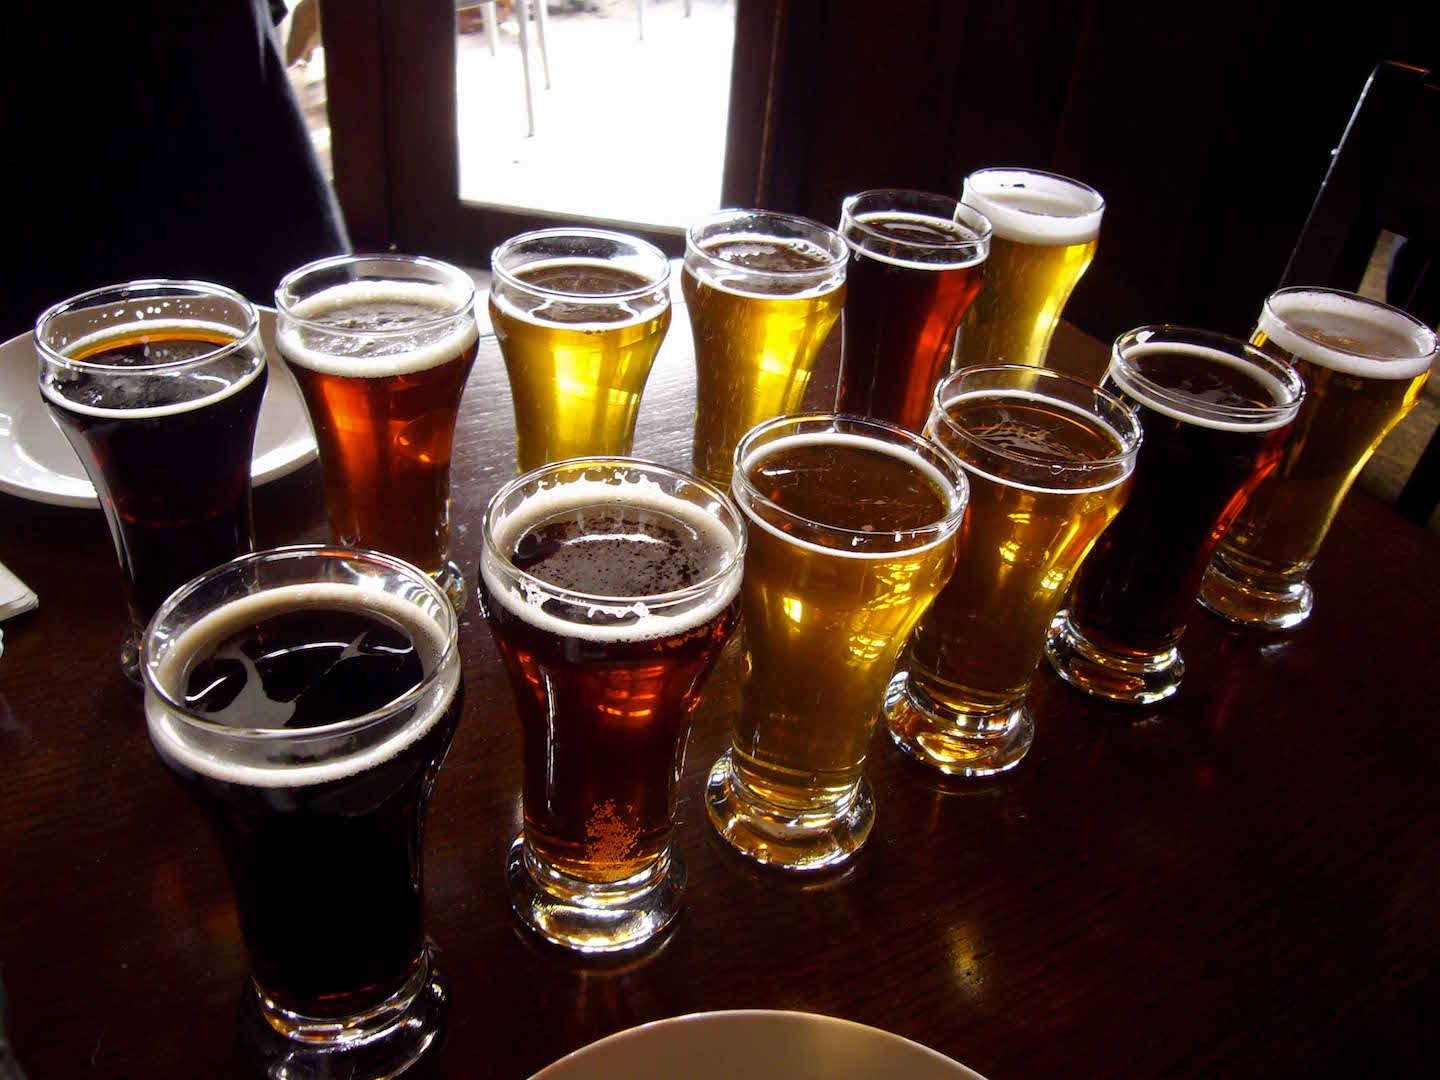 Celiac disease and gluten sensitivity: Is there such a thing as gluten-free beer?